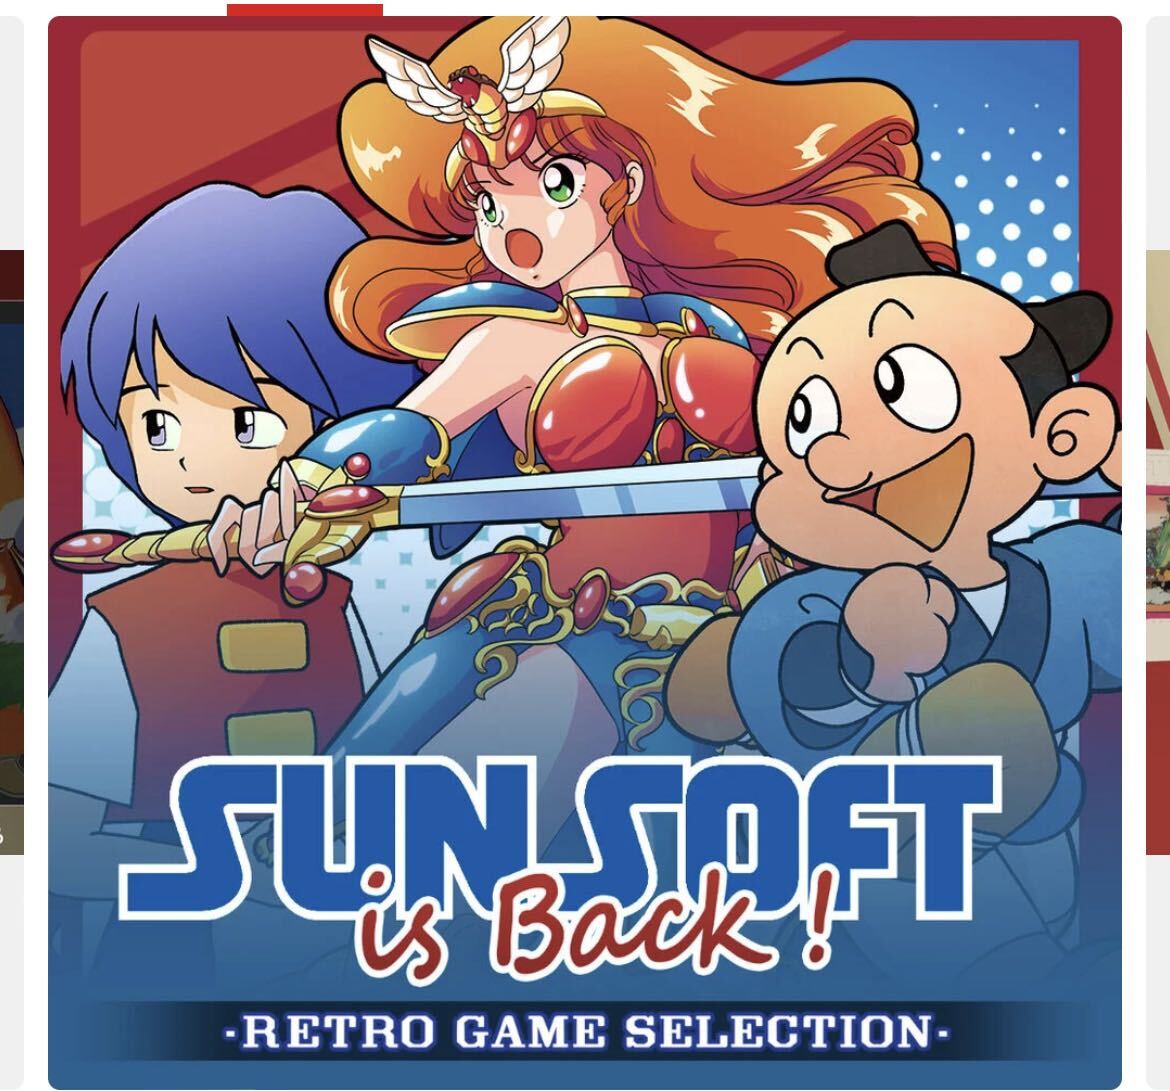 Switch SUNSOFT is Back! retro game selection 